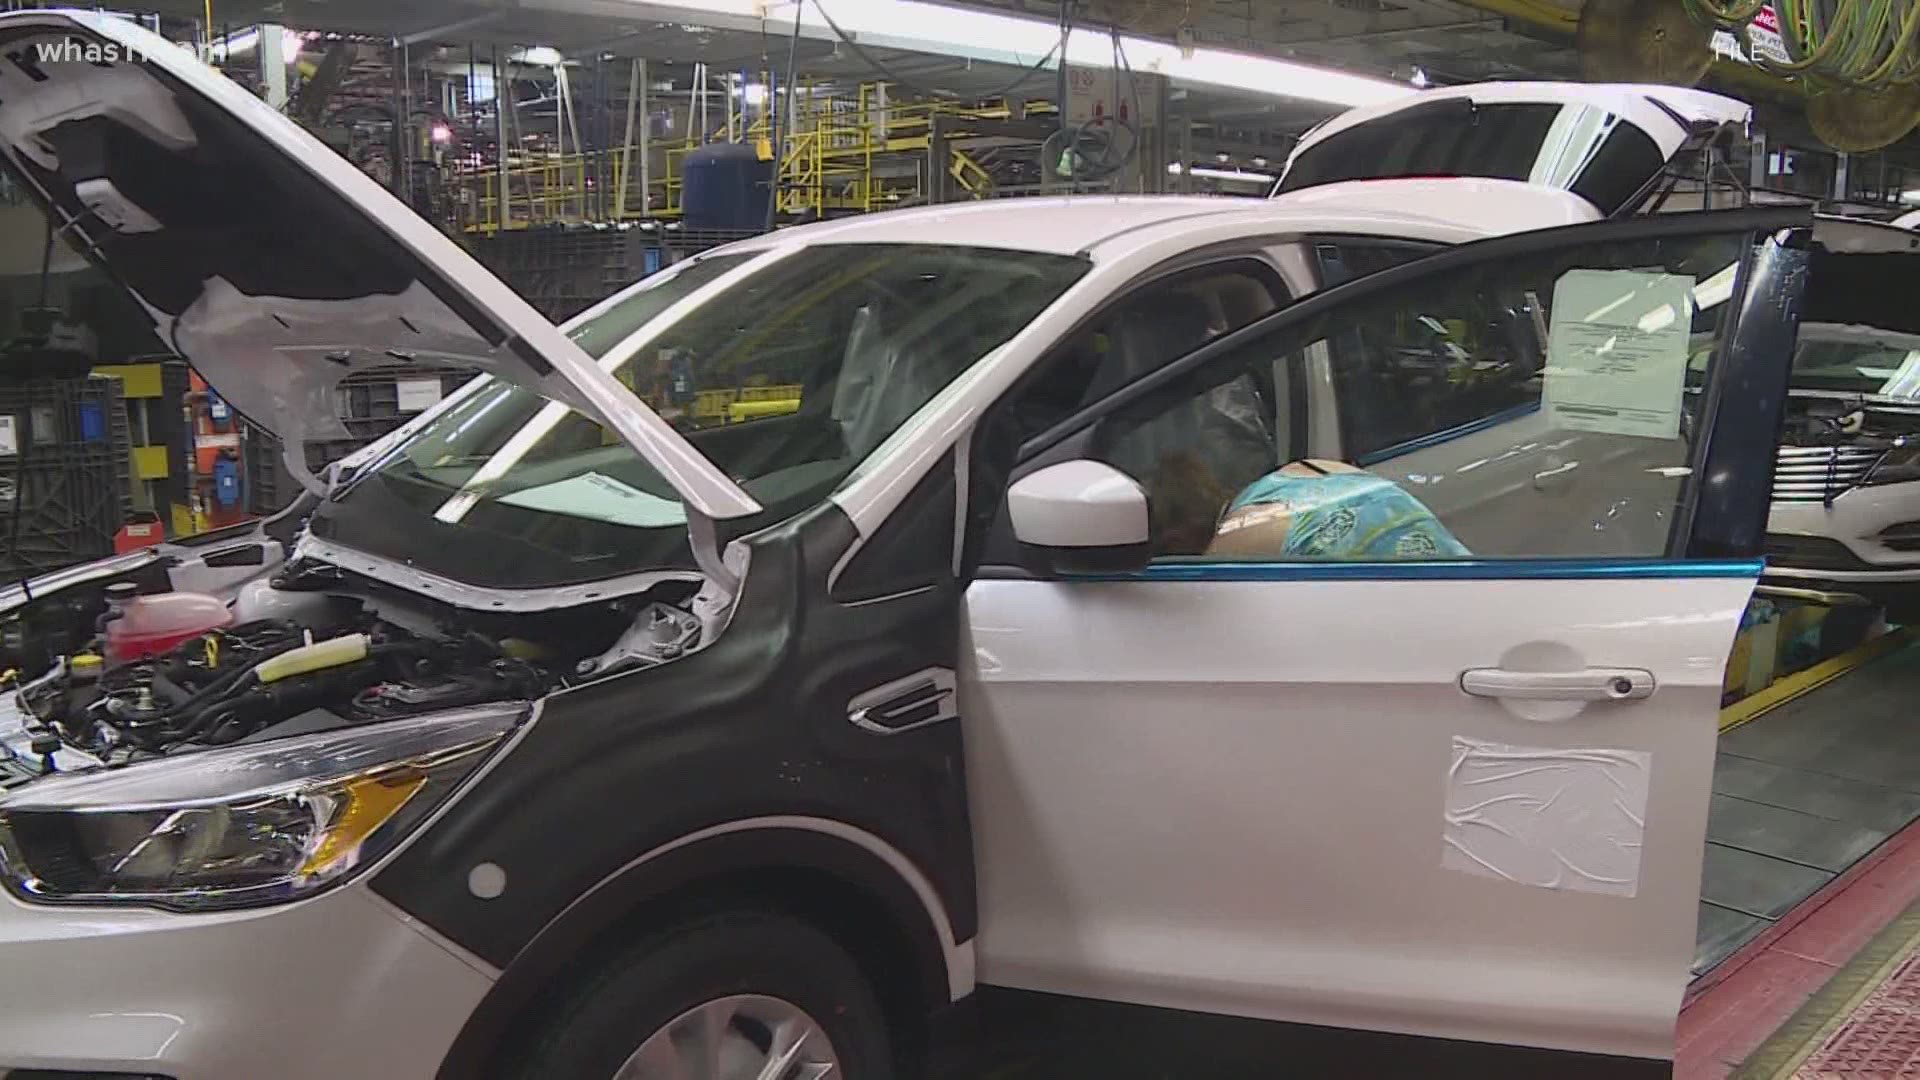 Ford said employees will work during typical shutdown weeks in late June and early July to build "must-have" vehicles.